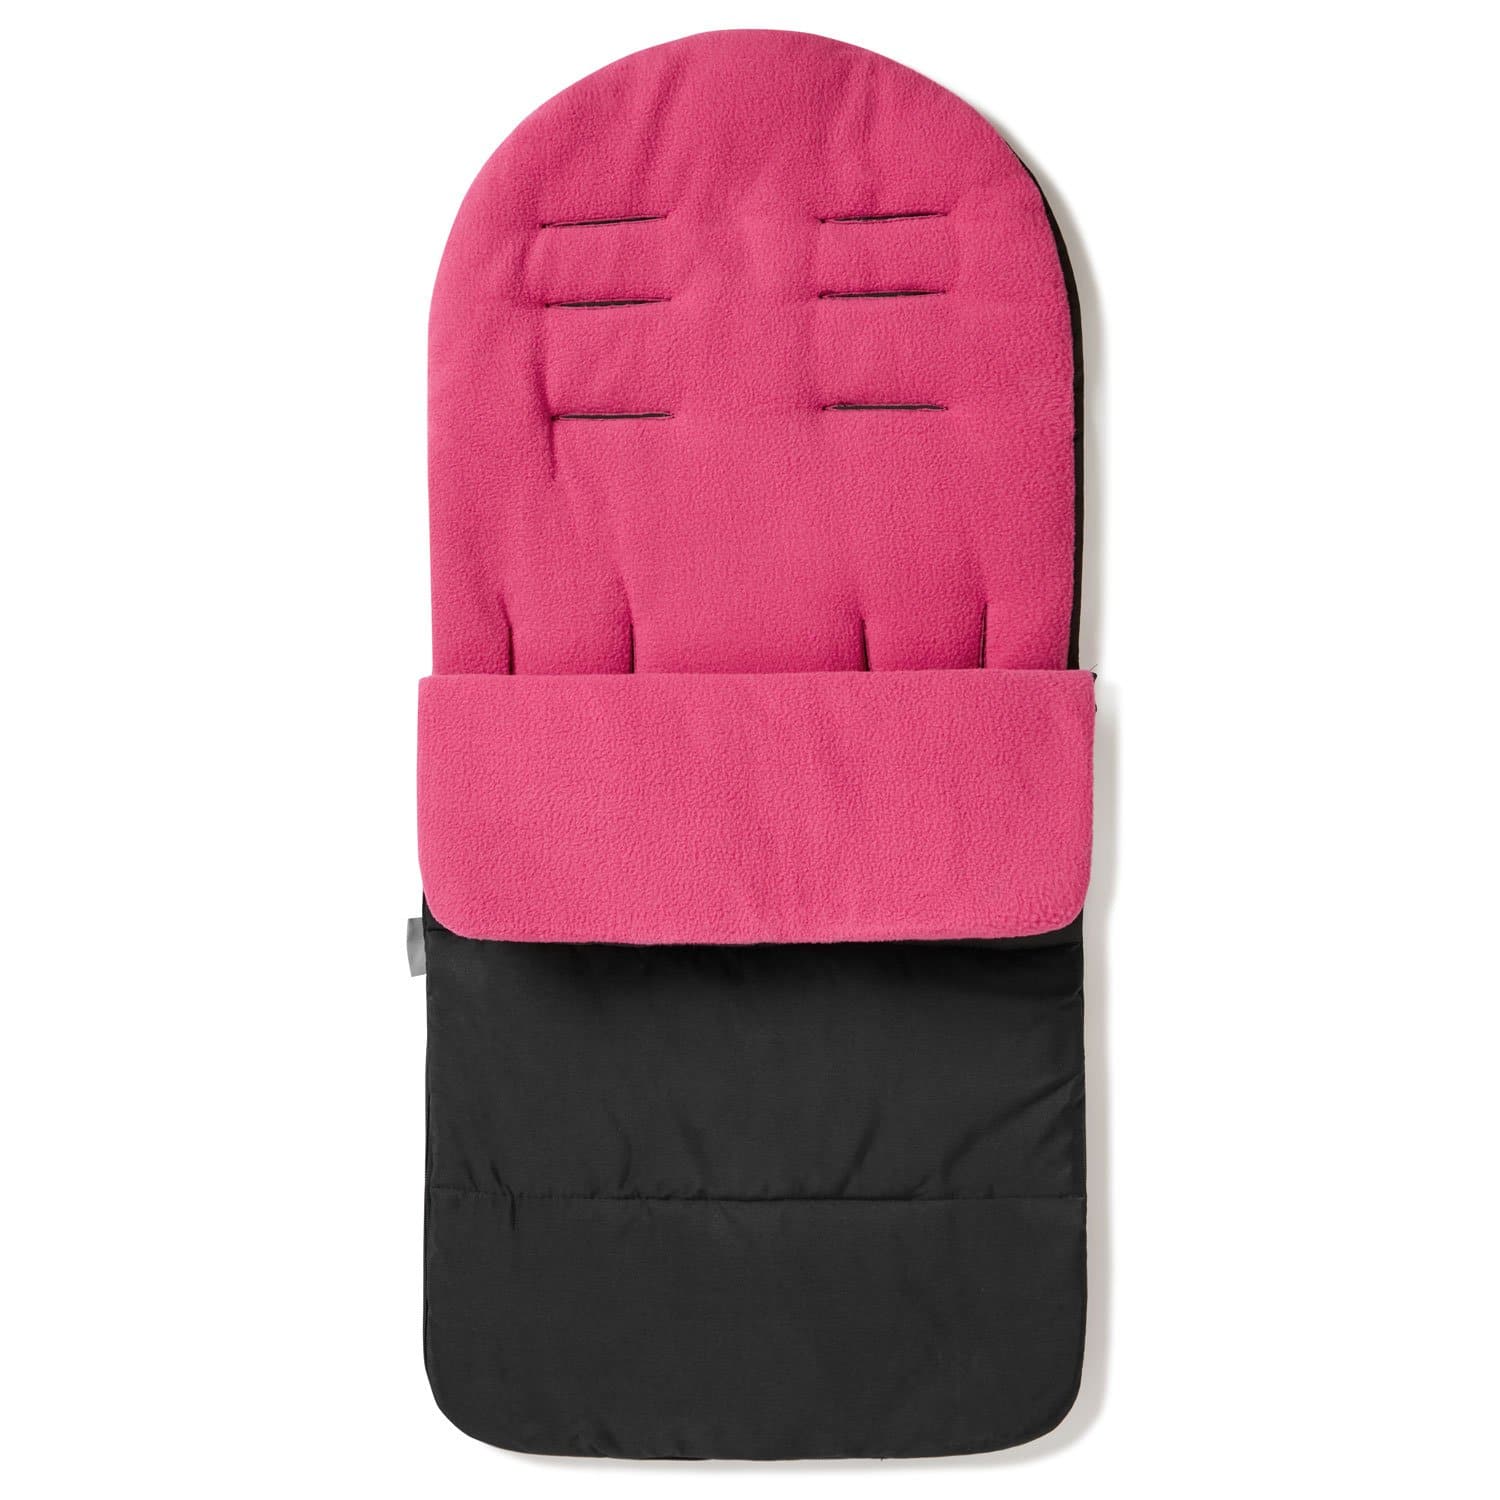 Premium Footmuff / Cosy Toes Compatible with My Babiie - Pink Rose / Fits All Models | For Your Little One